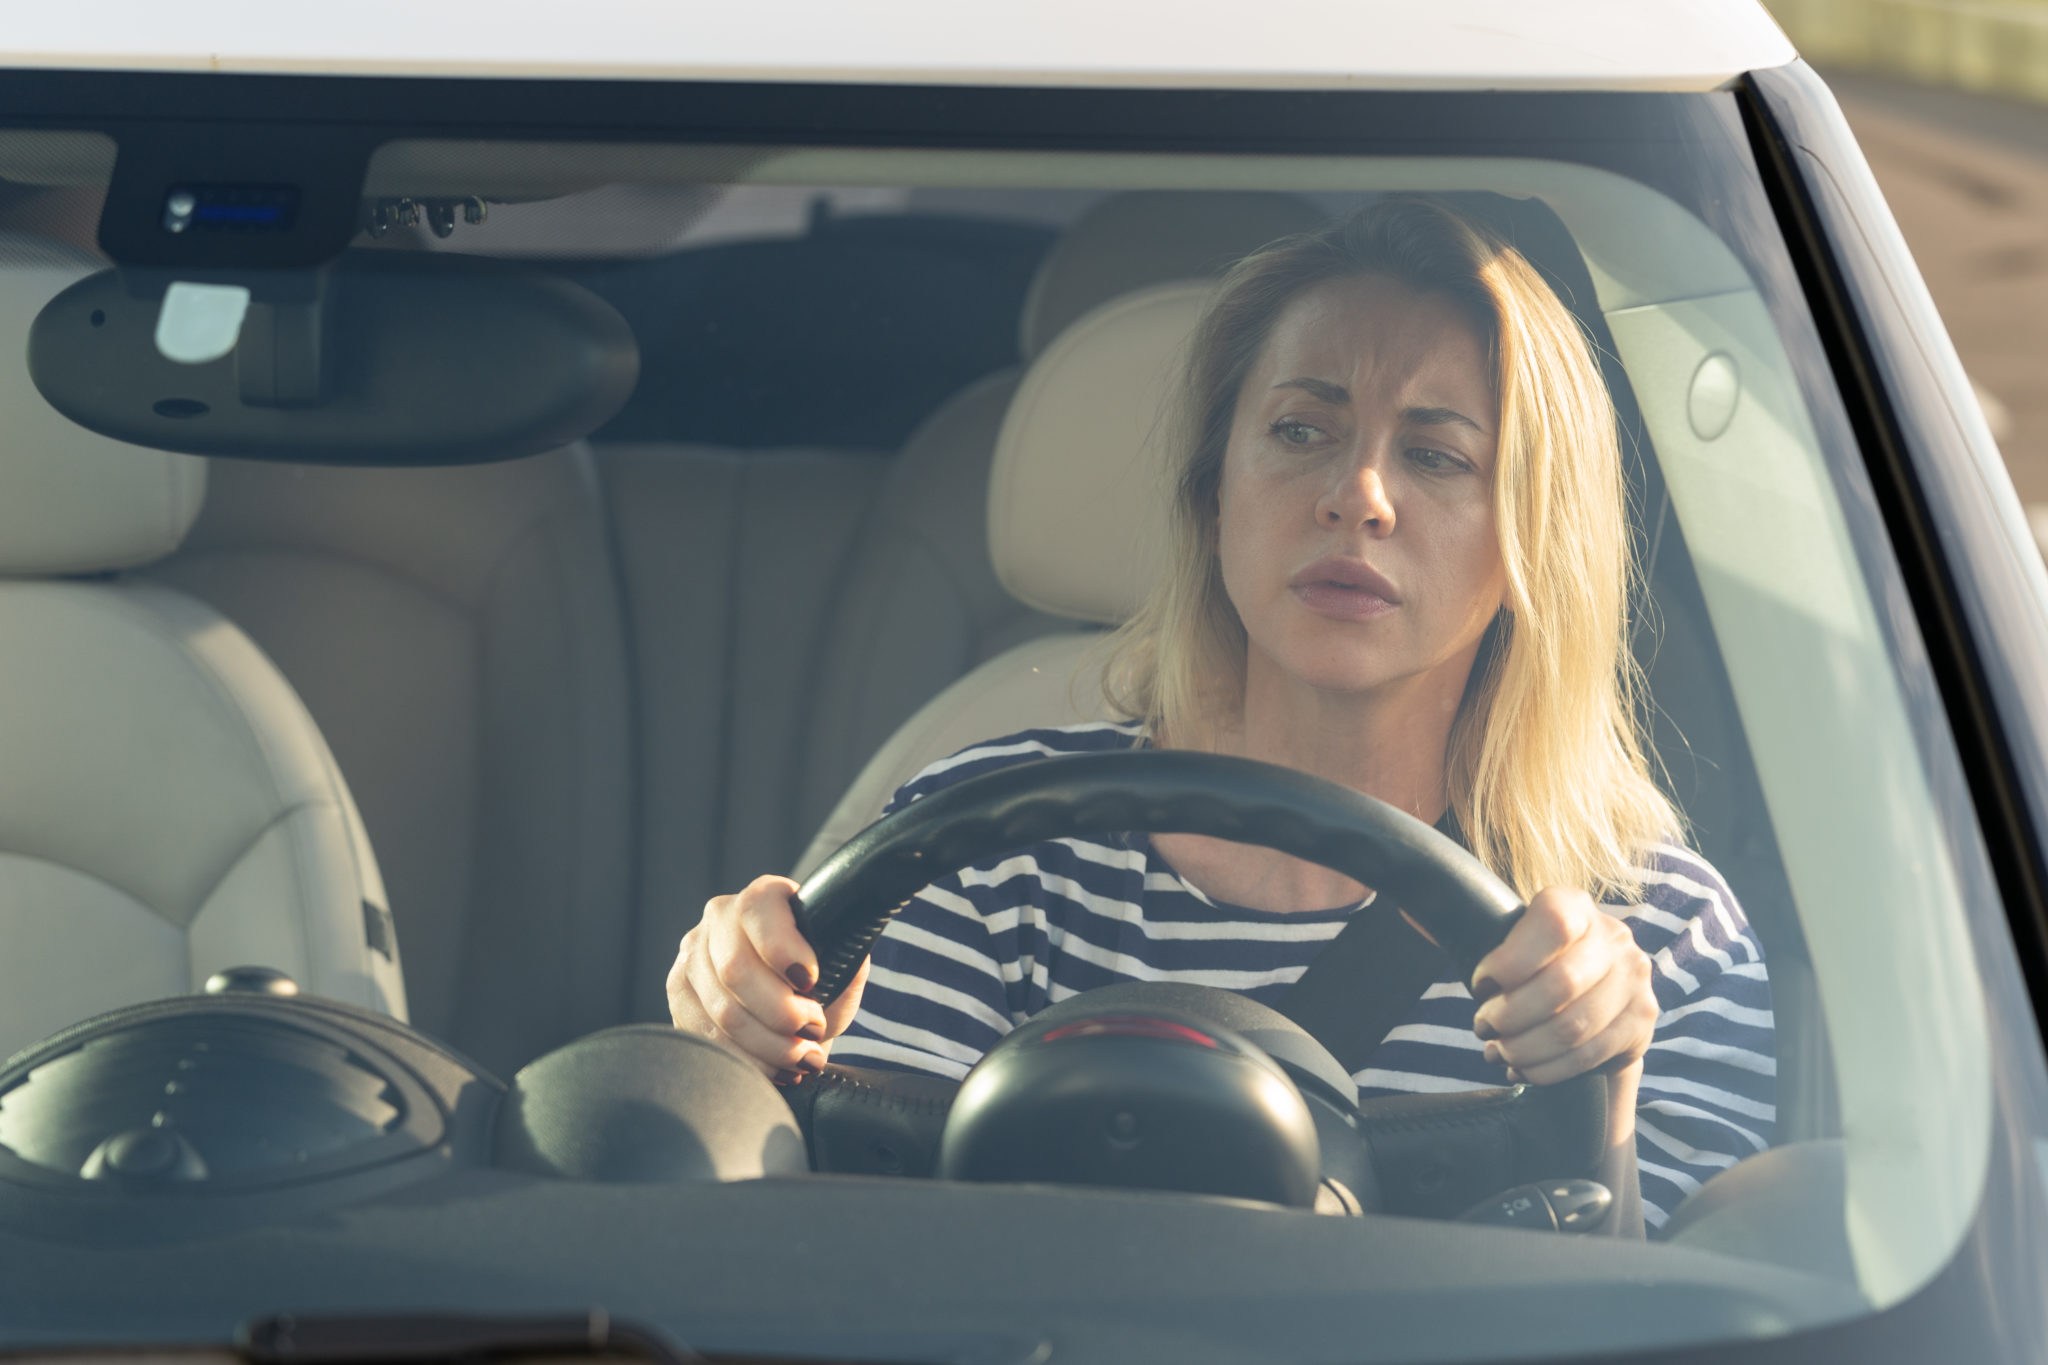 https://autolab.com.co/wp-content/uploads/2022/03/anxious-scared-woman-driver-worried-looking-at-car-2021-09-04-05-02-50-utc-scaled.jpg